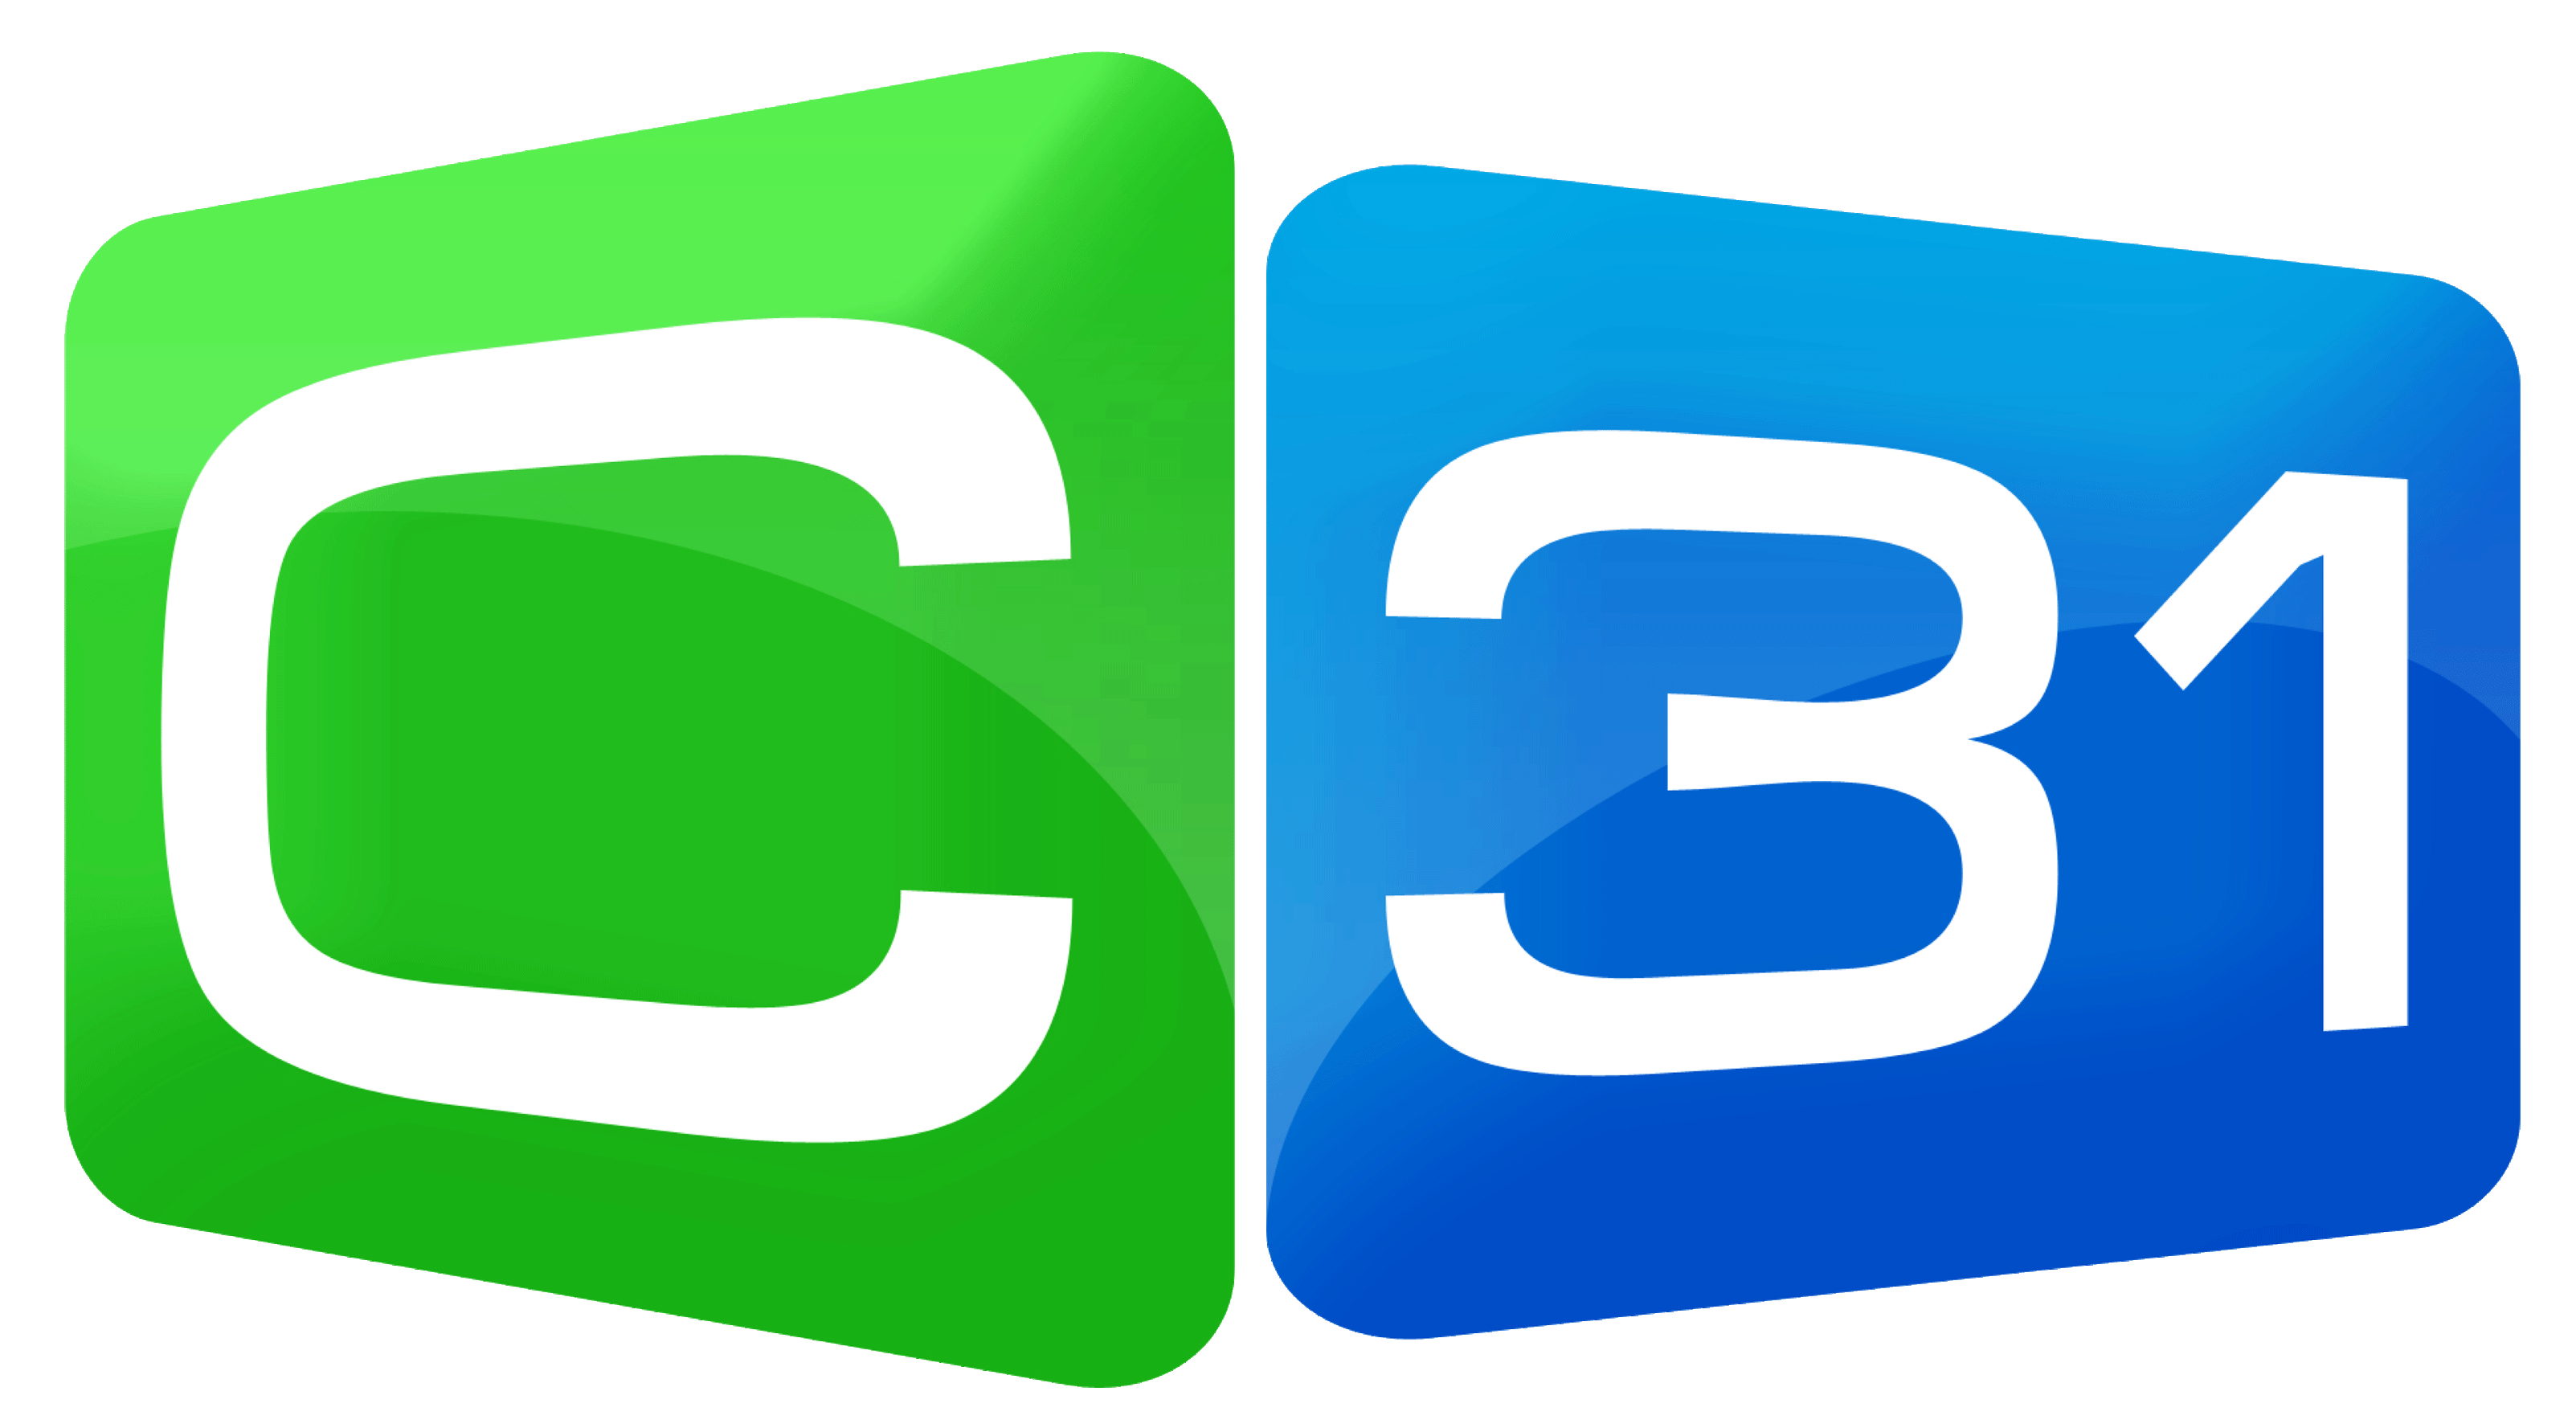 Channel 31